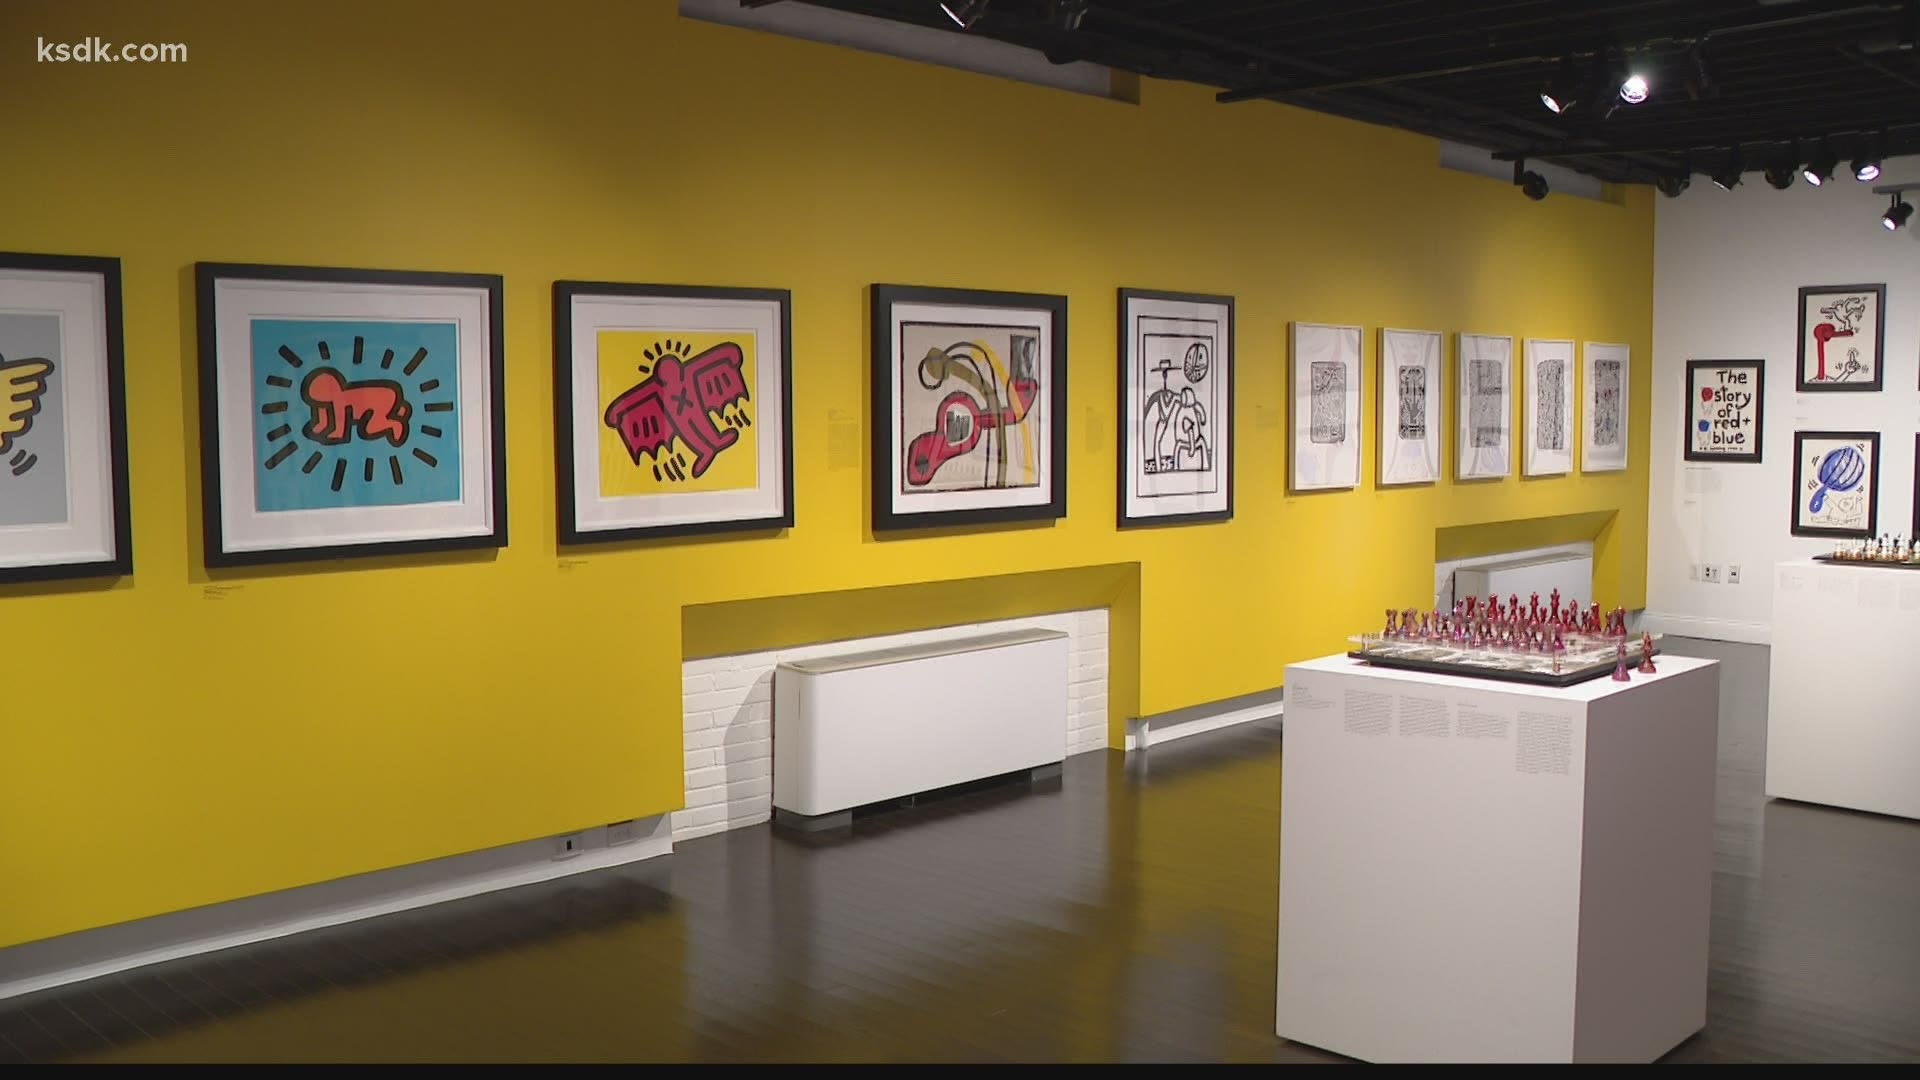 Some of the pieces on display are a tribute to the late Haring created by artists here in St. Louis